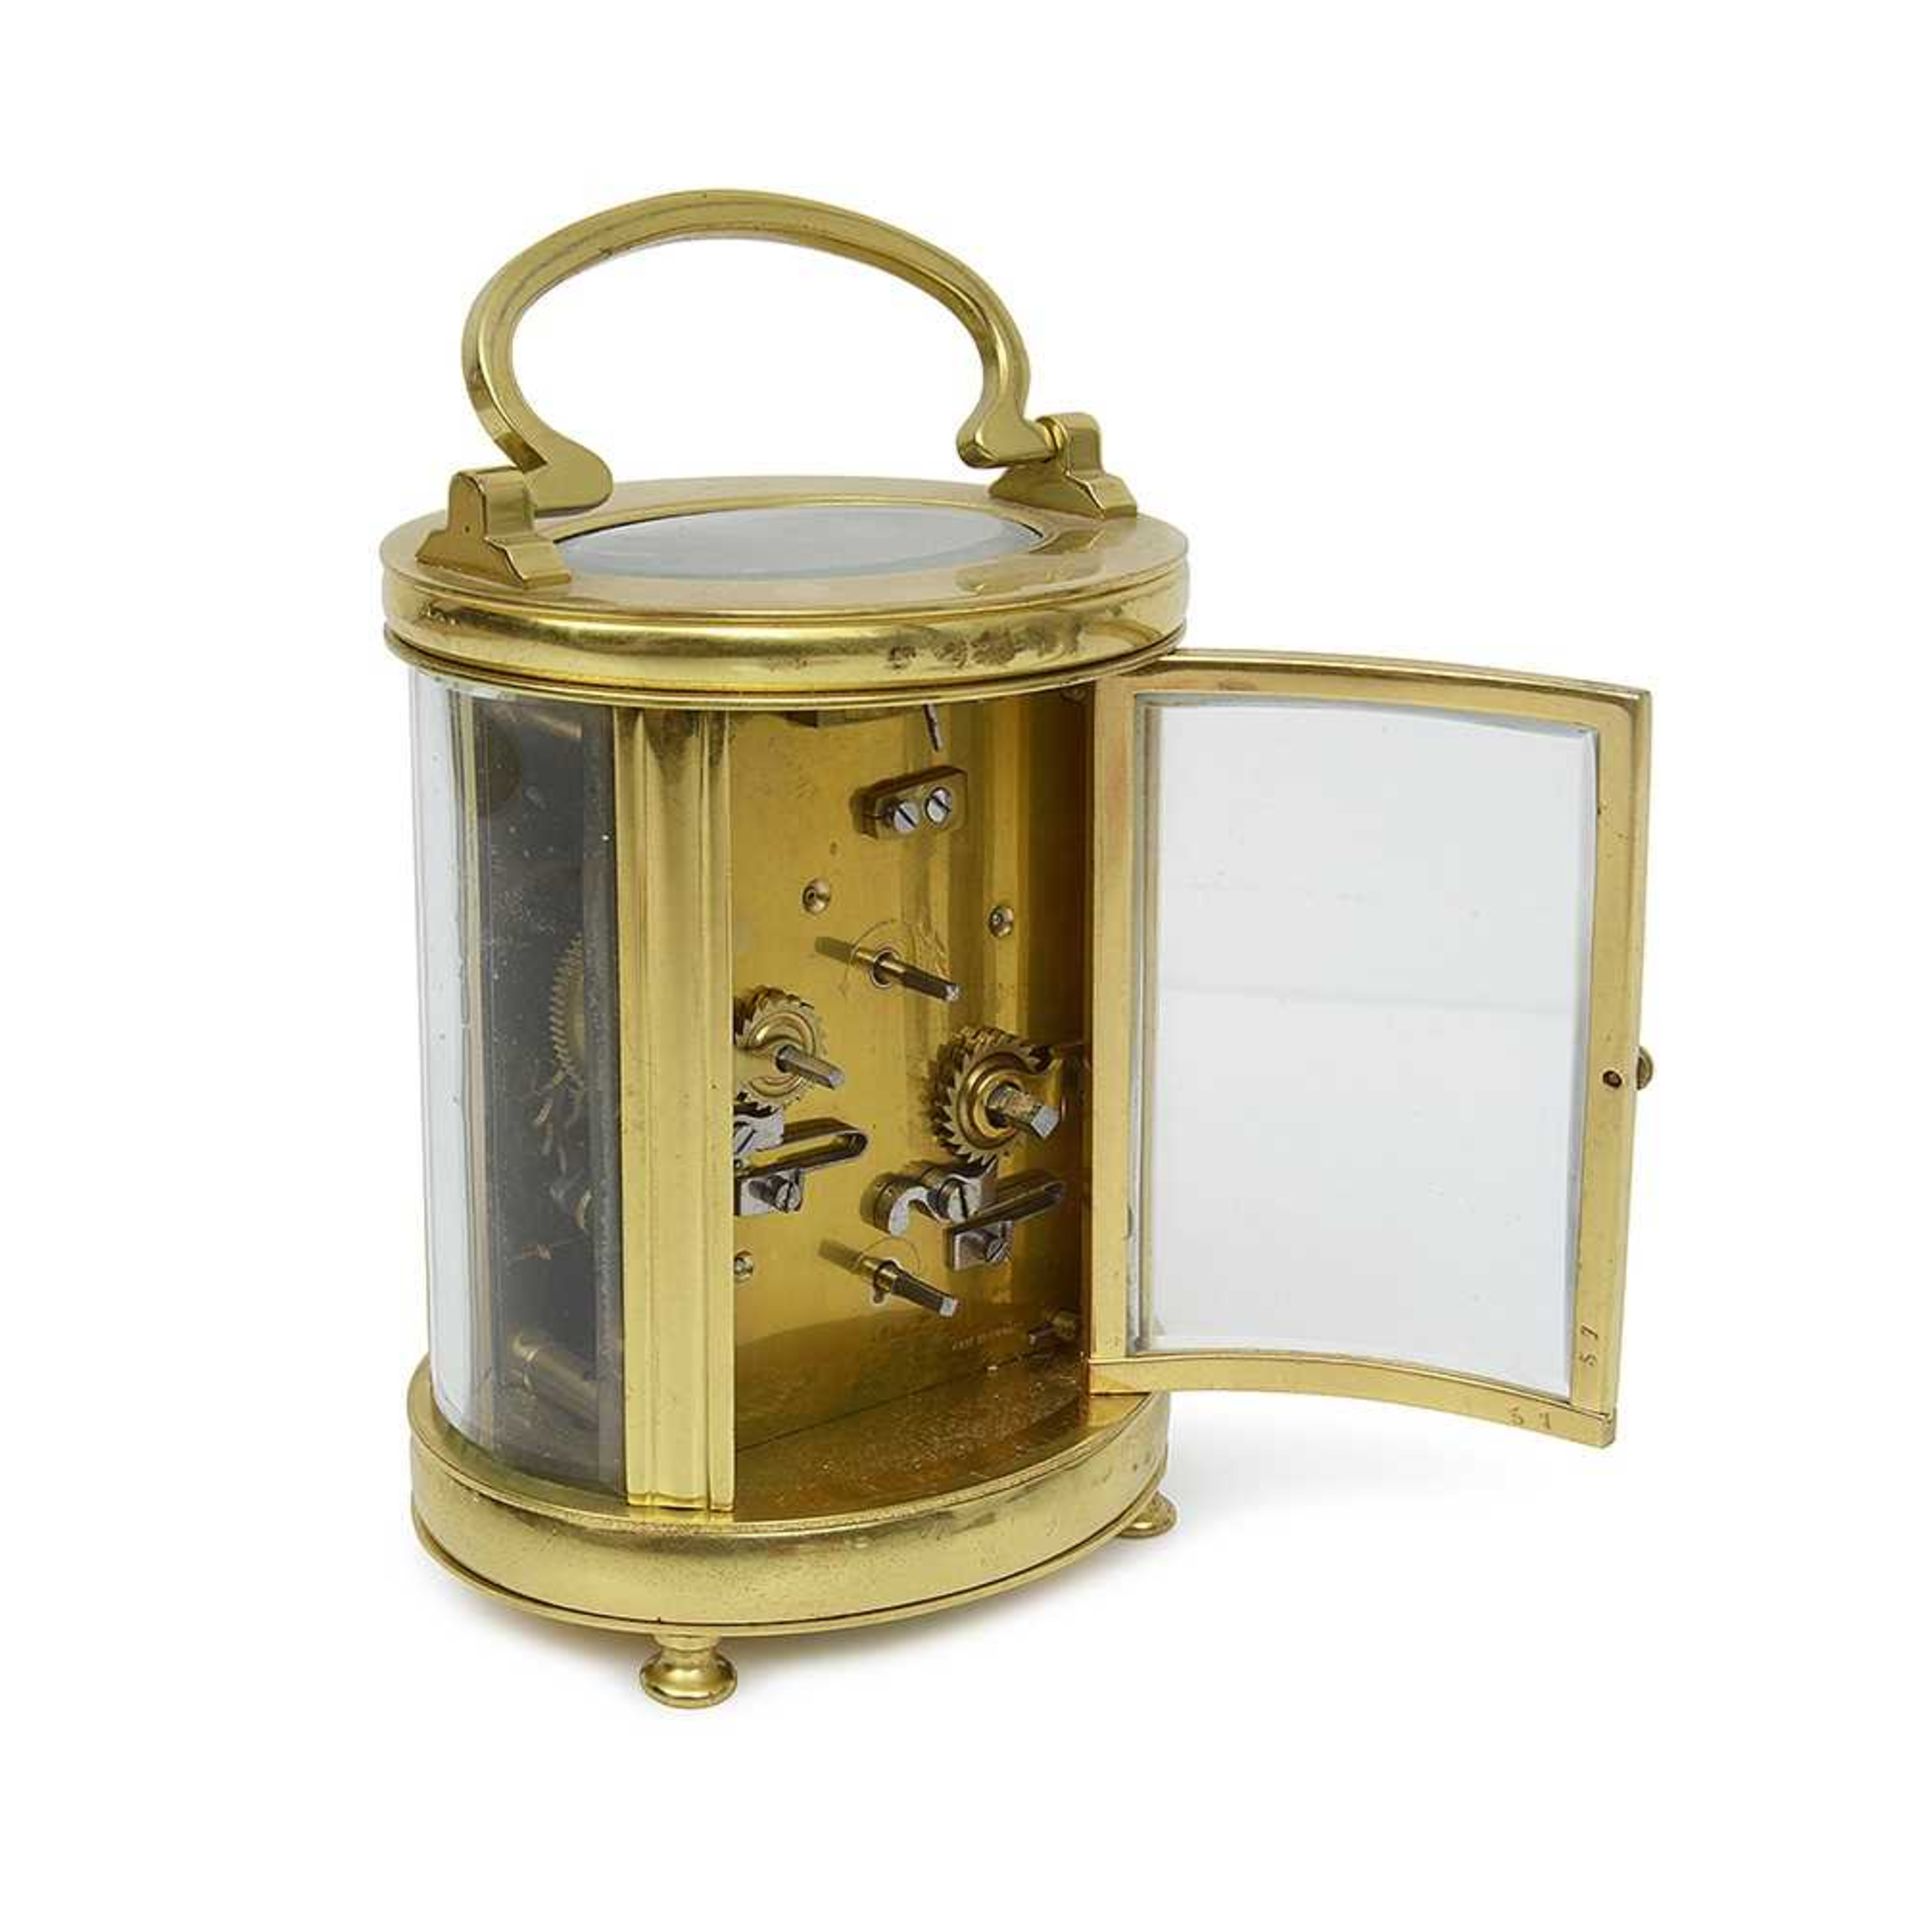 A LATE 19TH CENTURY FRENCH GILT BRASS CARRIAGE CLOCK WITH ALARM - Image 2 of 2